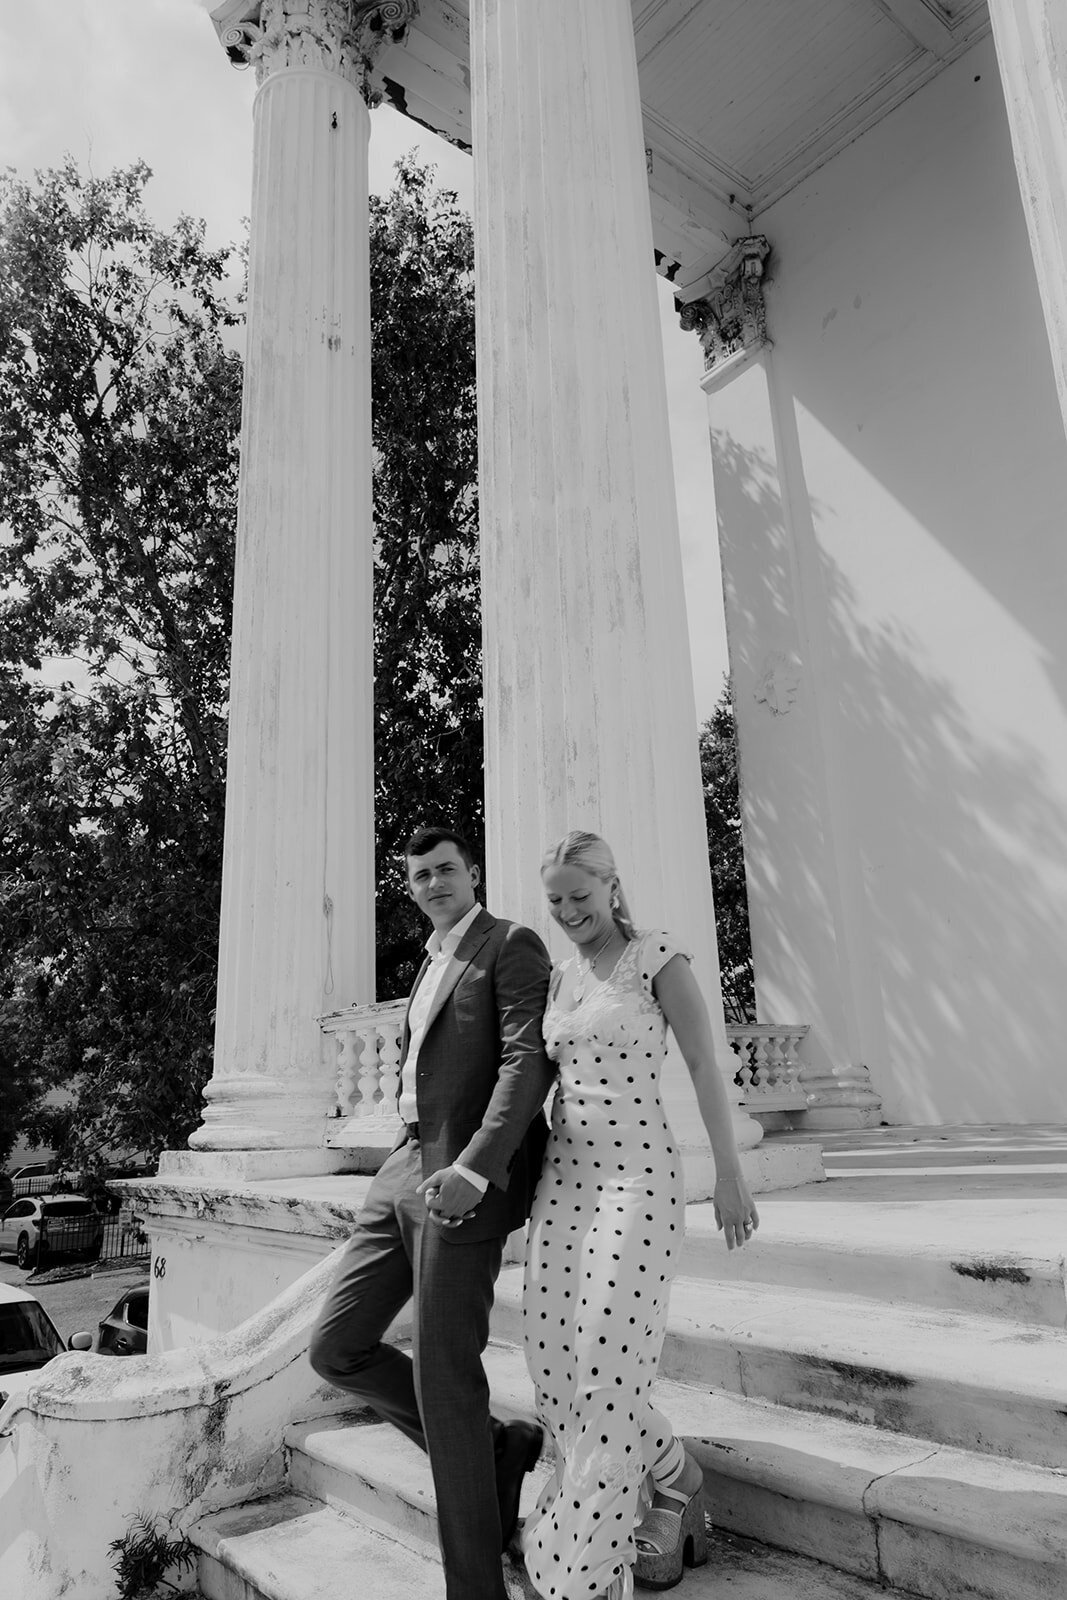 Couple holding hand walking down stairs with greel columns in background. Unique CHarleston engagement location